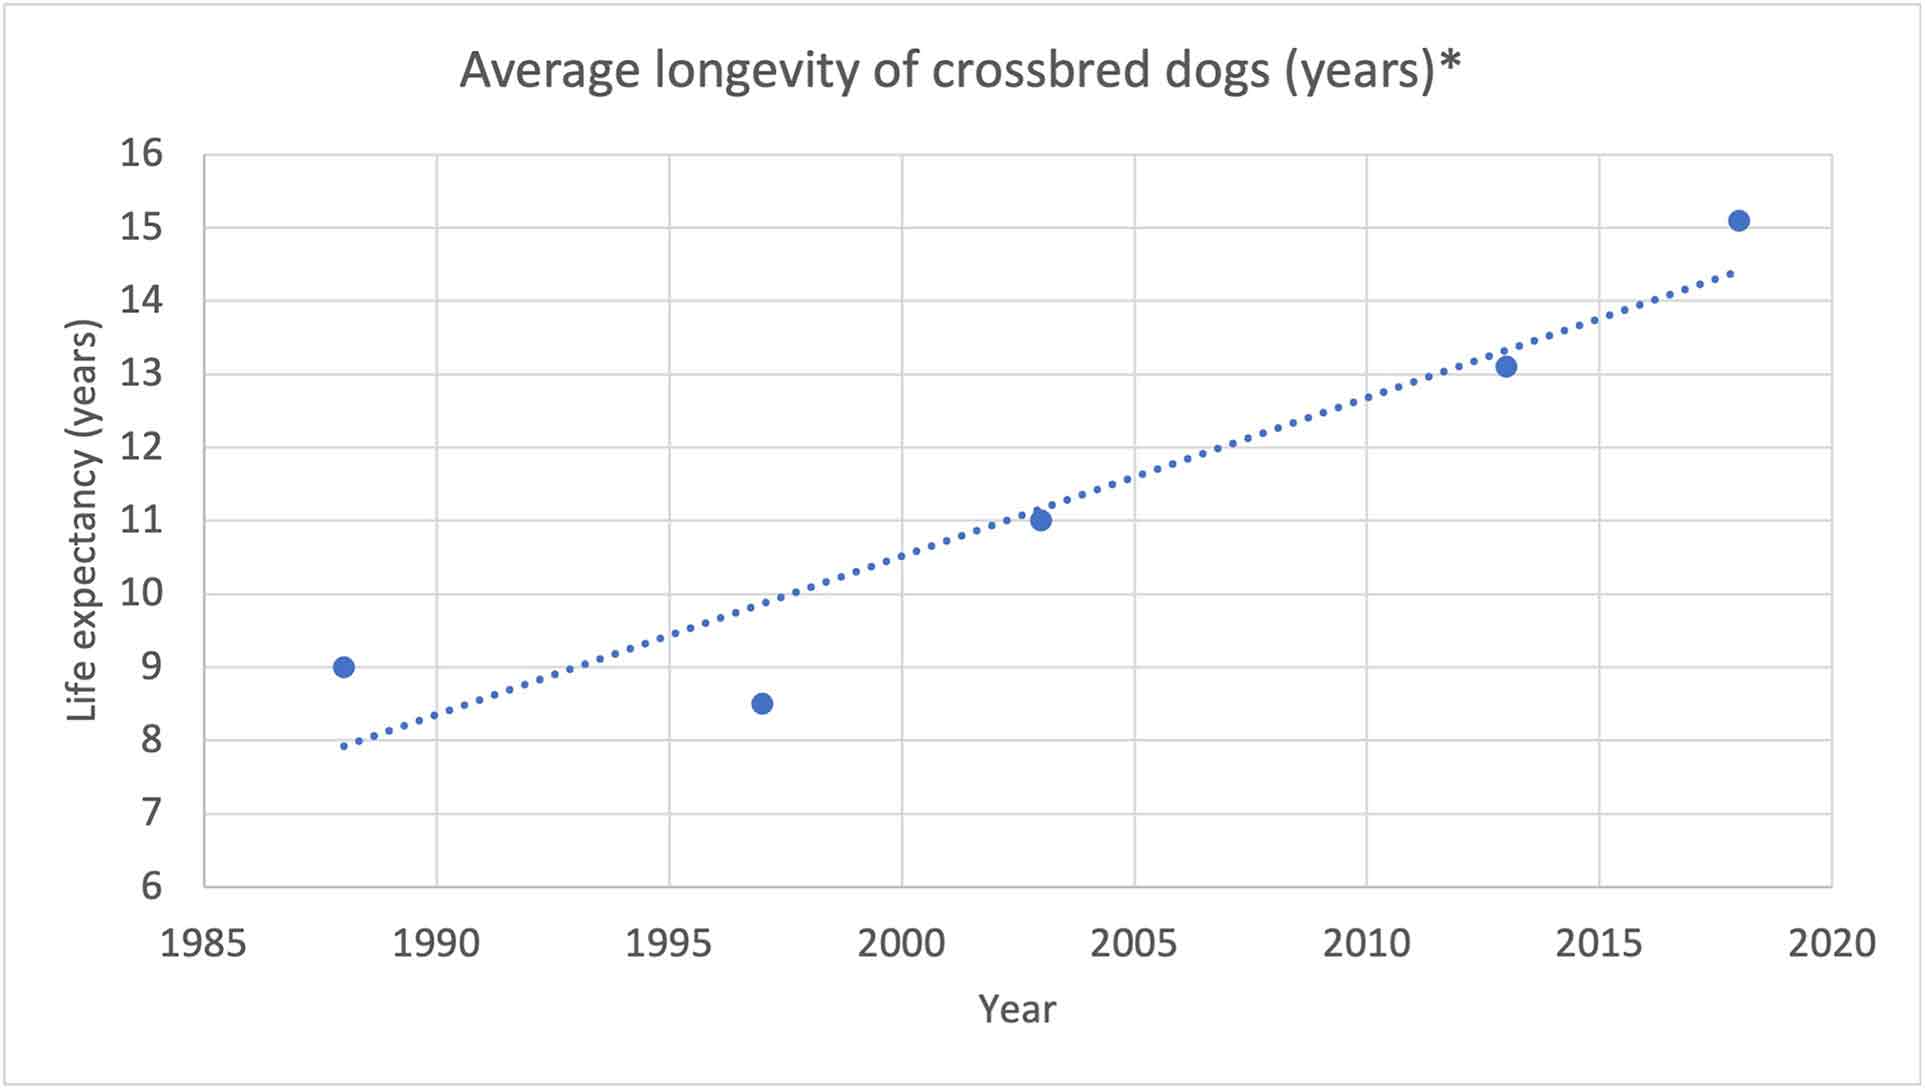 Figure 1. Average longevity of cross-bred dogs (years; based on year of publication of article).